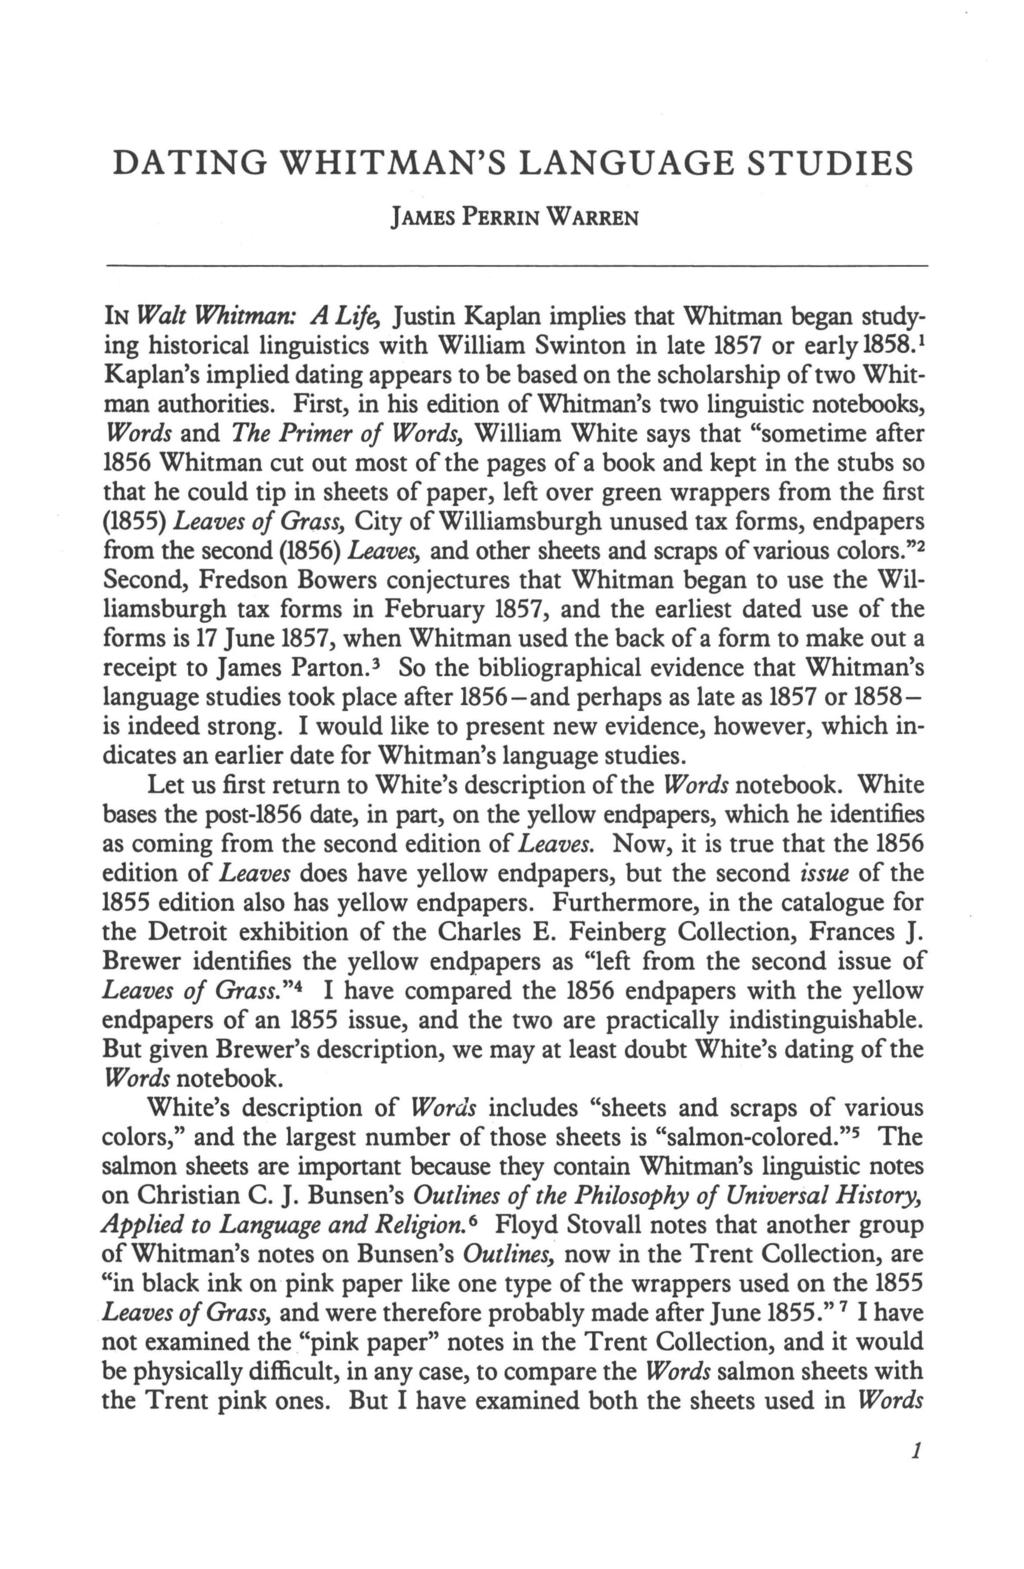 DATING WHITMAN'S LANGUAGE STUDIES JAMES PERRIN WARREN IN Walt Whitman: A Life, Justin Kaplan implies that Whitman began studying historical linguistics with William Swinton in late 1857 or early 1858.